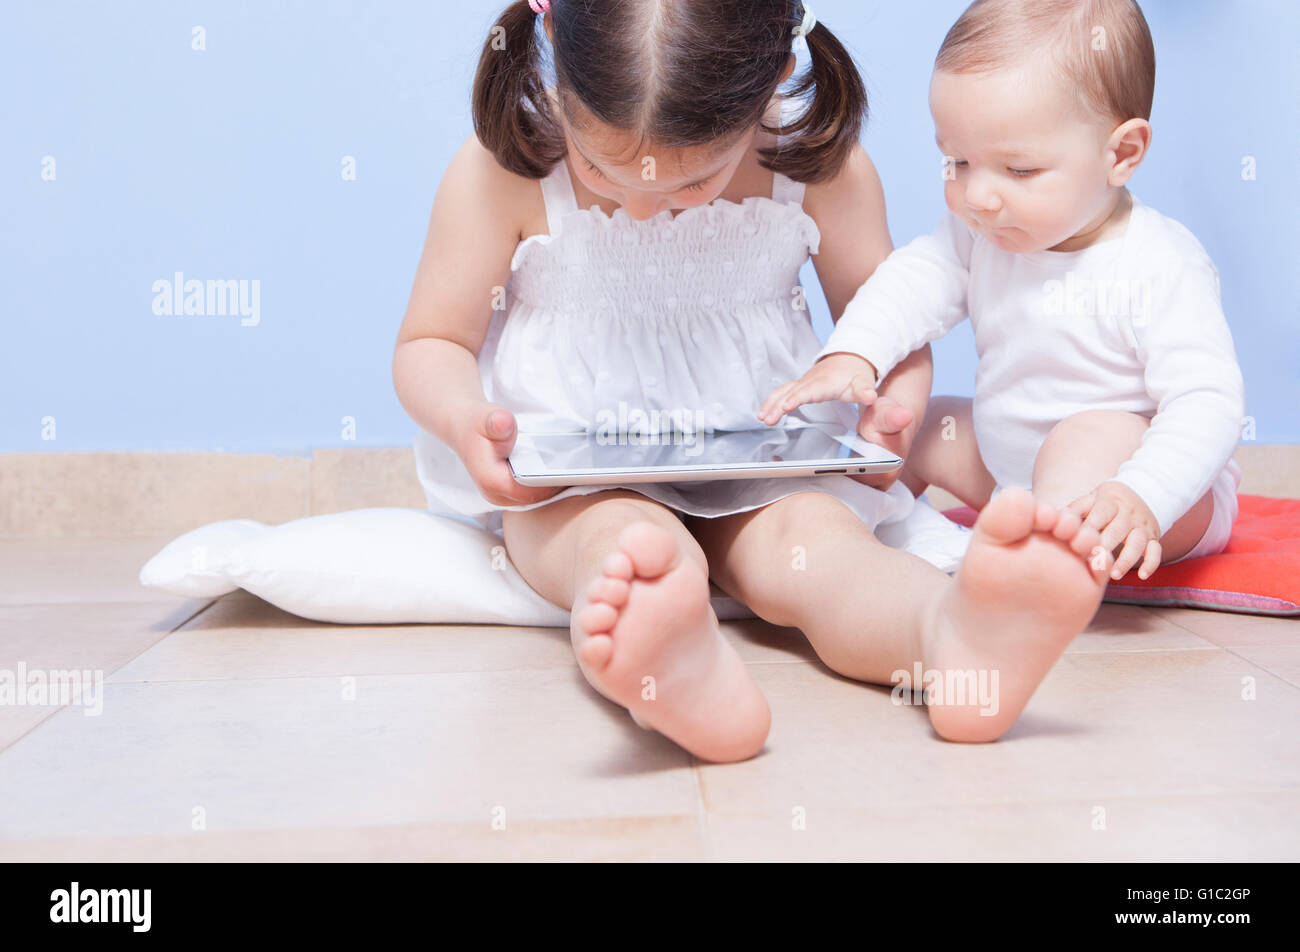 Baby boy discovering with her sister a tablet pc Stock Photo